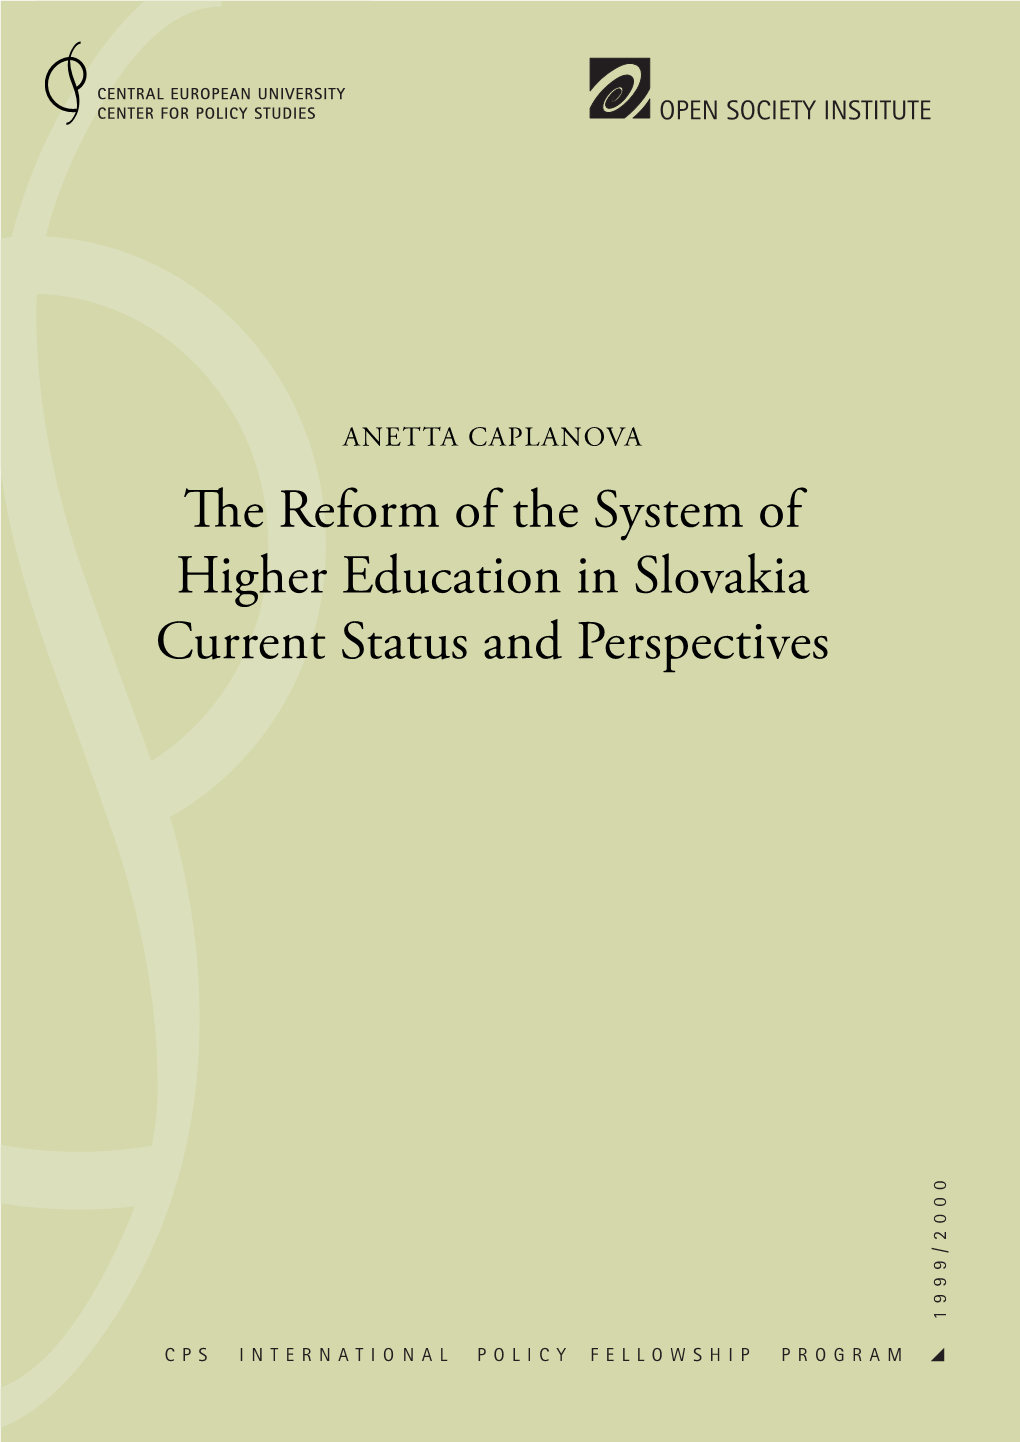 The Reform of the System of Higher Education in Slovakia Current Status and Perspectives 2 0 0 0 / 9 1 9 9